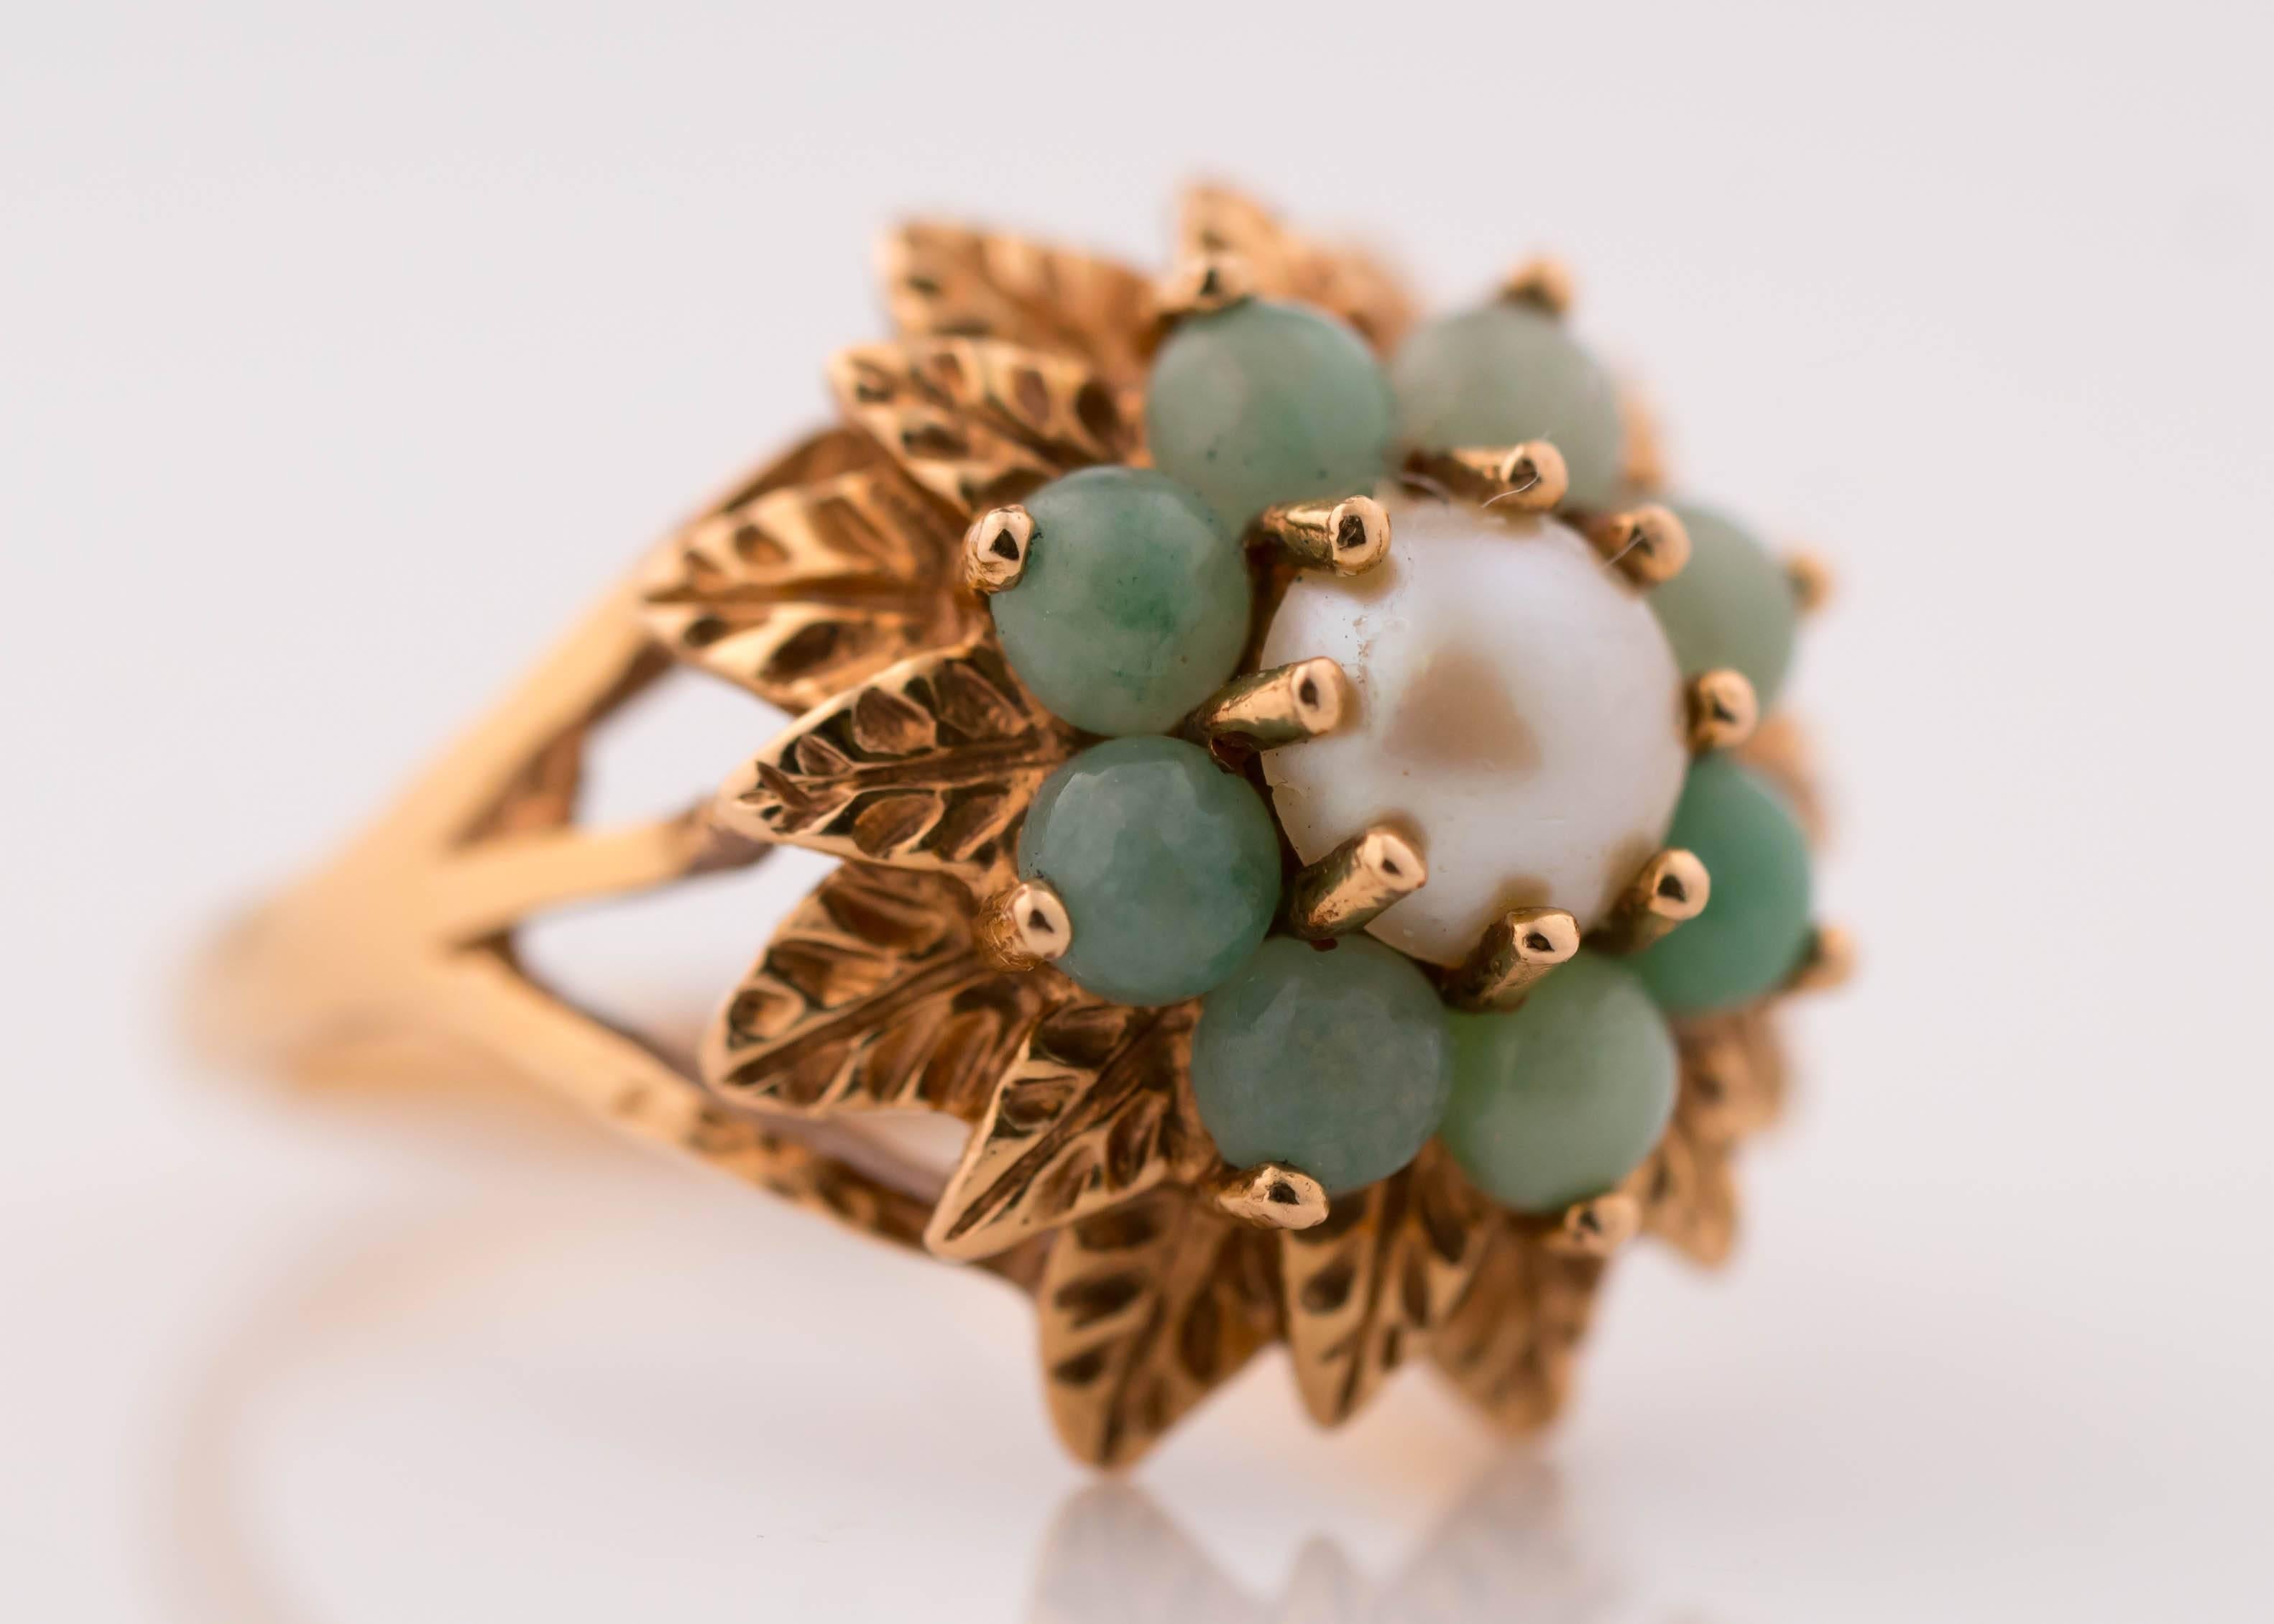 1950s Floral Ring - Jade, Pearl and 14 Karat Yellow Gold

Features a Pearl center encircled by 8 Jade cabochons. Behind the Jade are two rows of Gold Leaves set in 2 layers. The leaves are set at alternating heights, creating an illusion of fullness